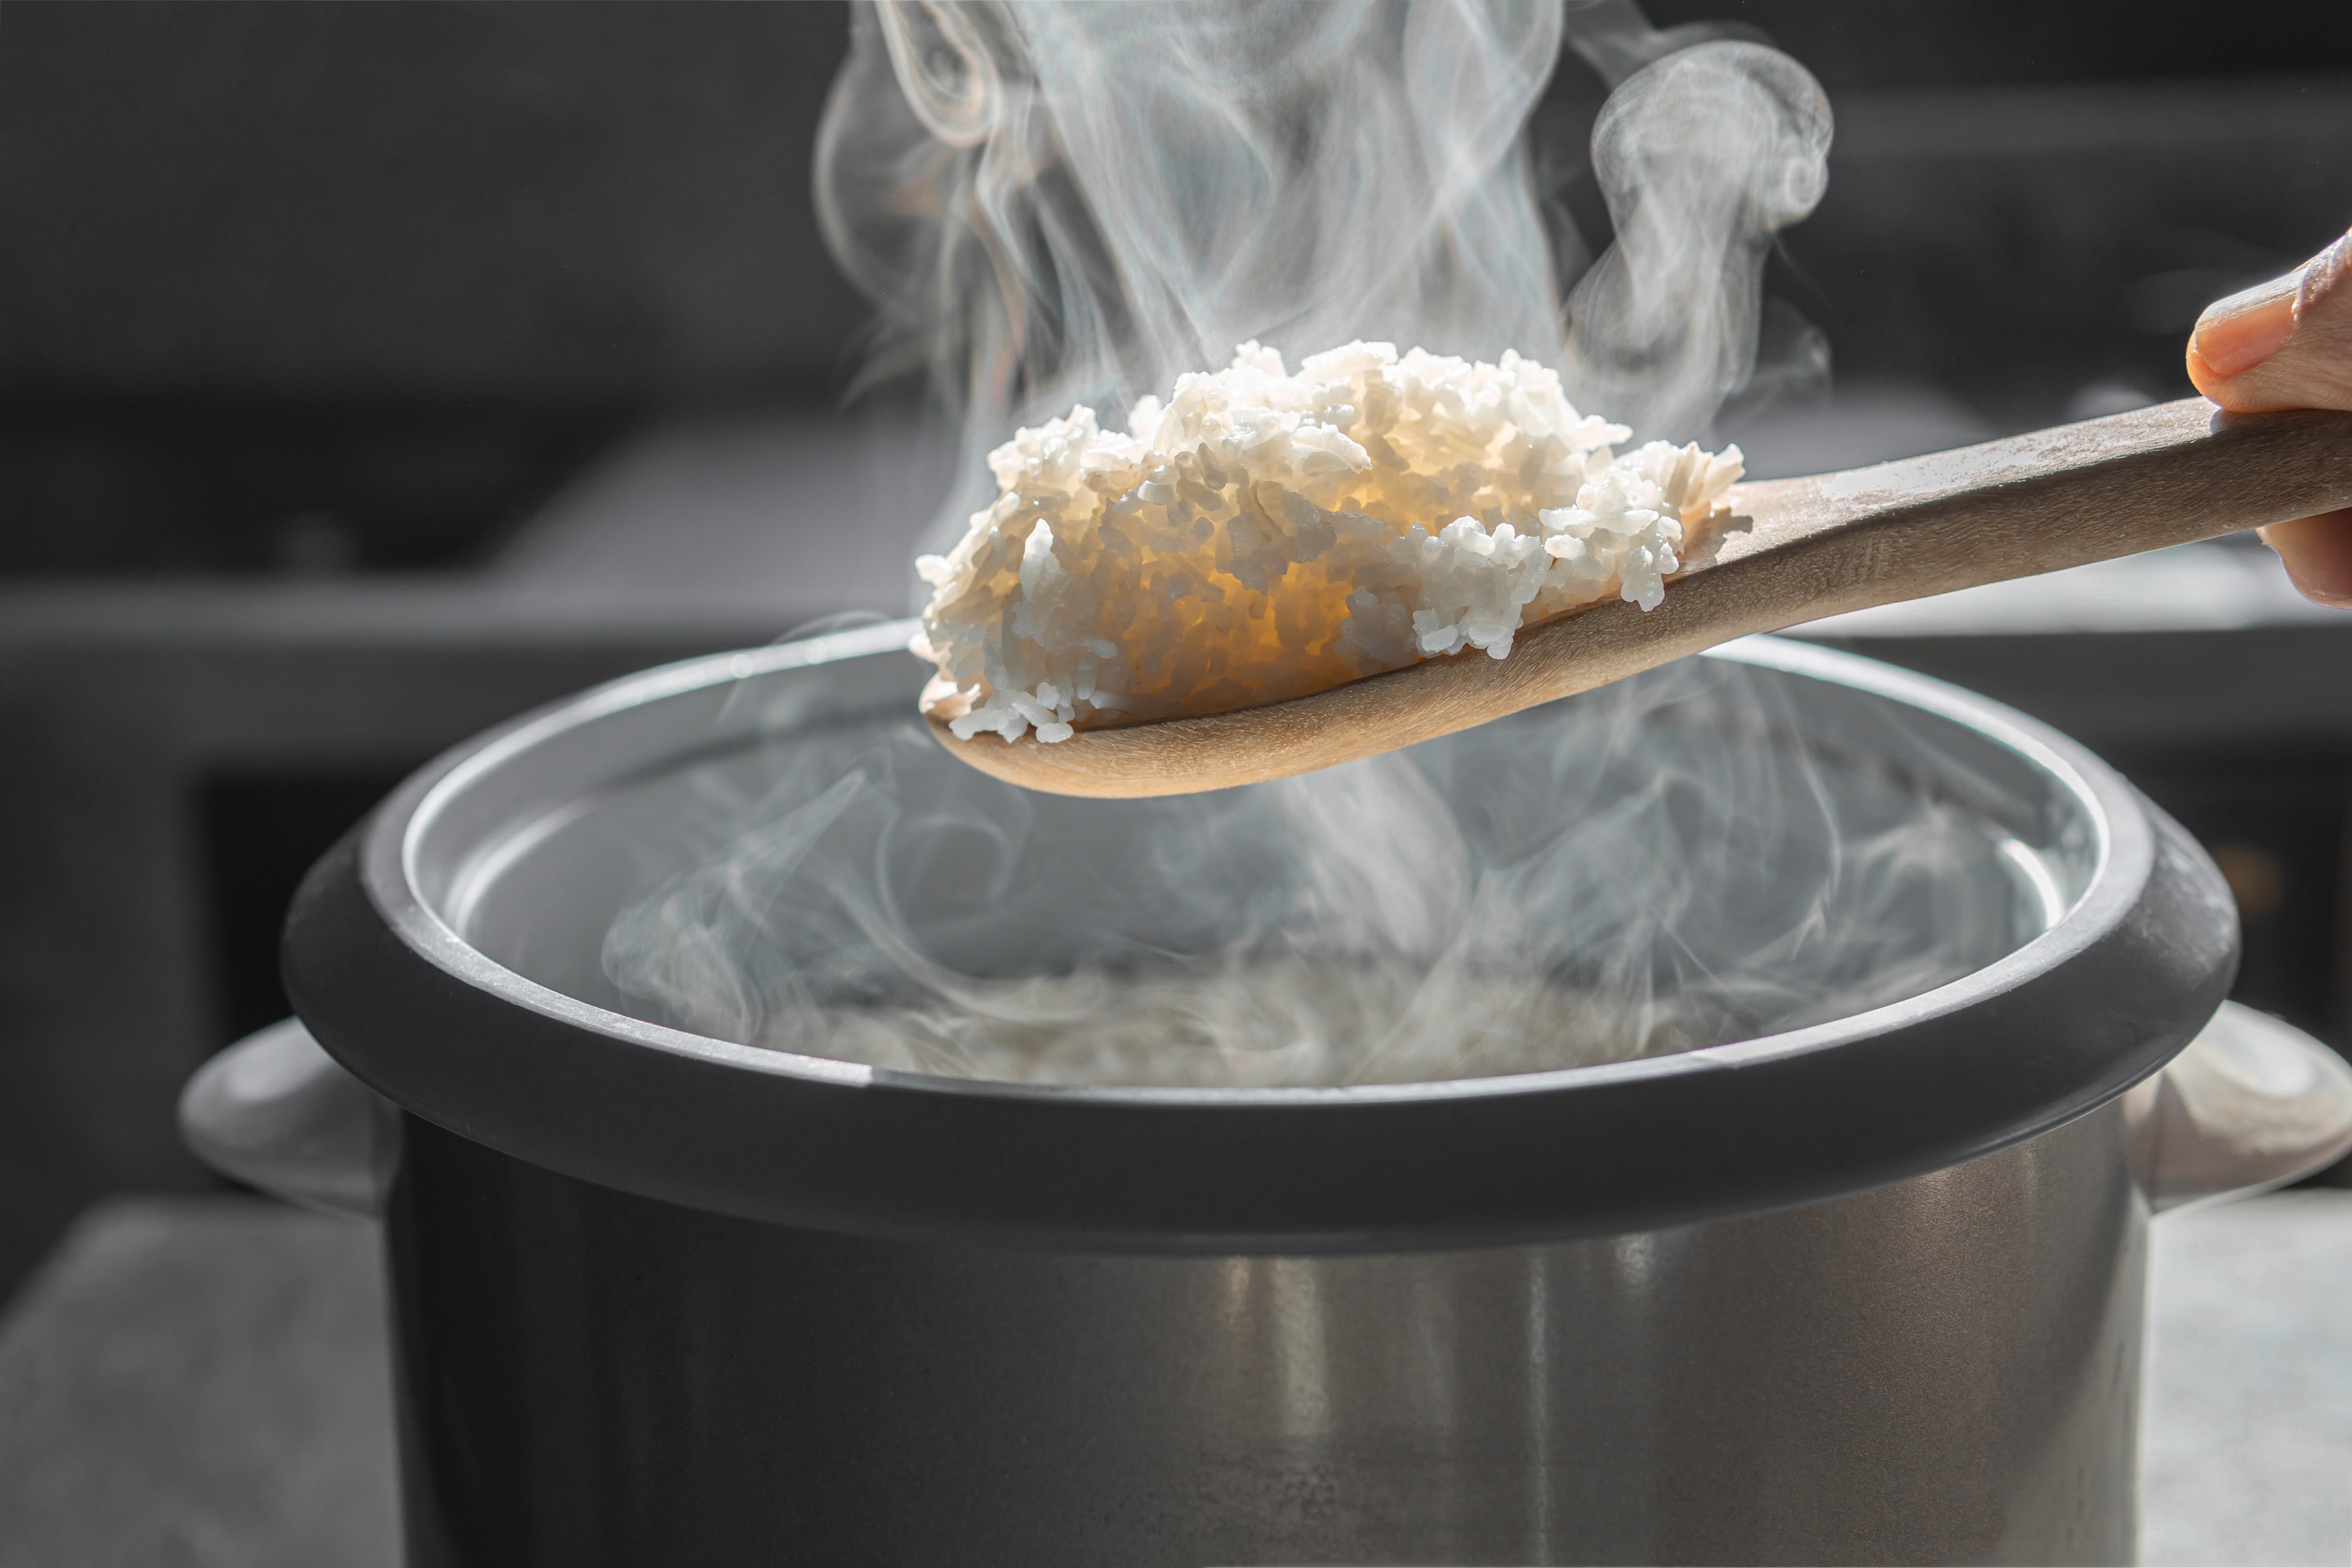 A wooden spoon filled with steaming hot rice can be seen hovering above a rice cooker appliance